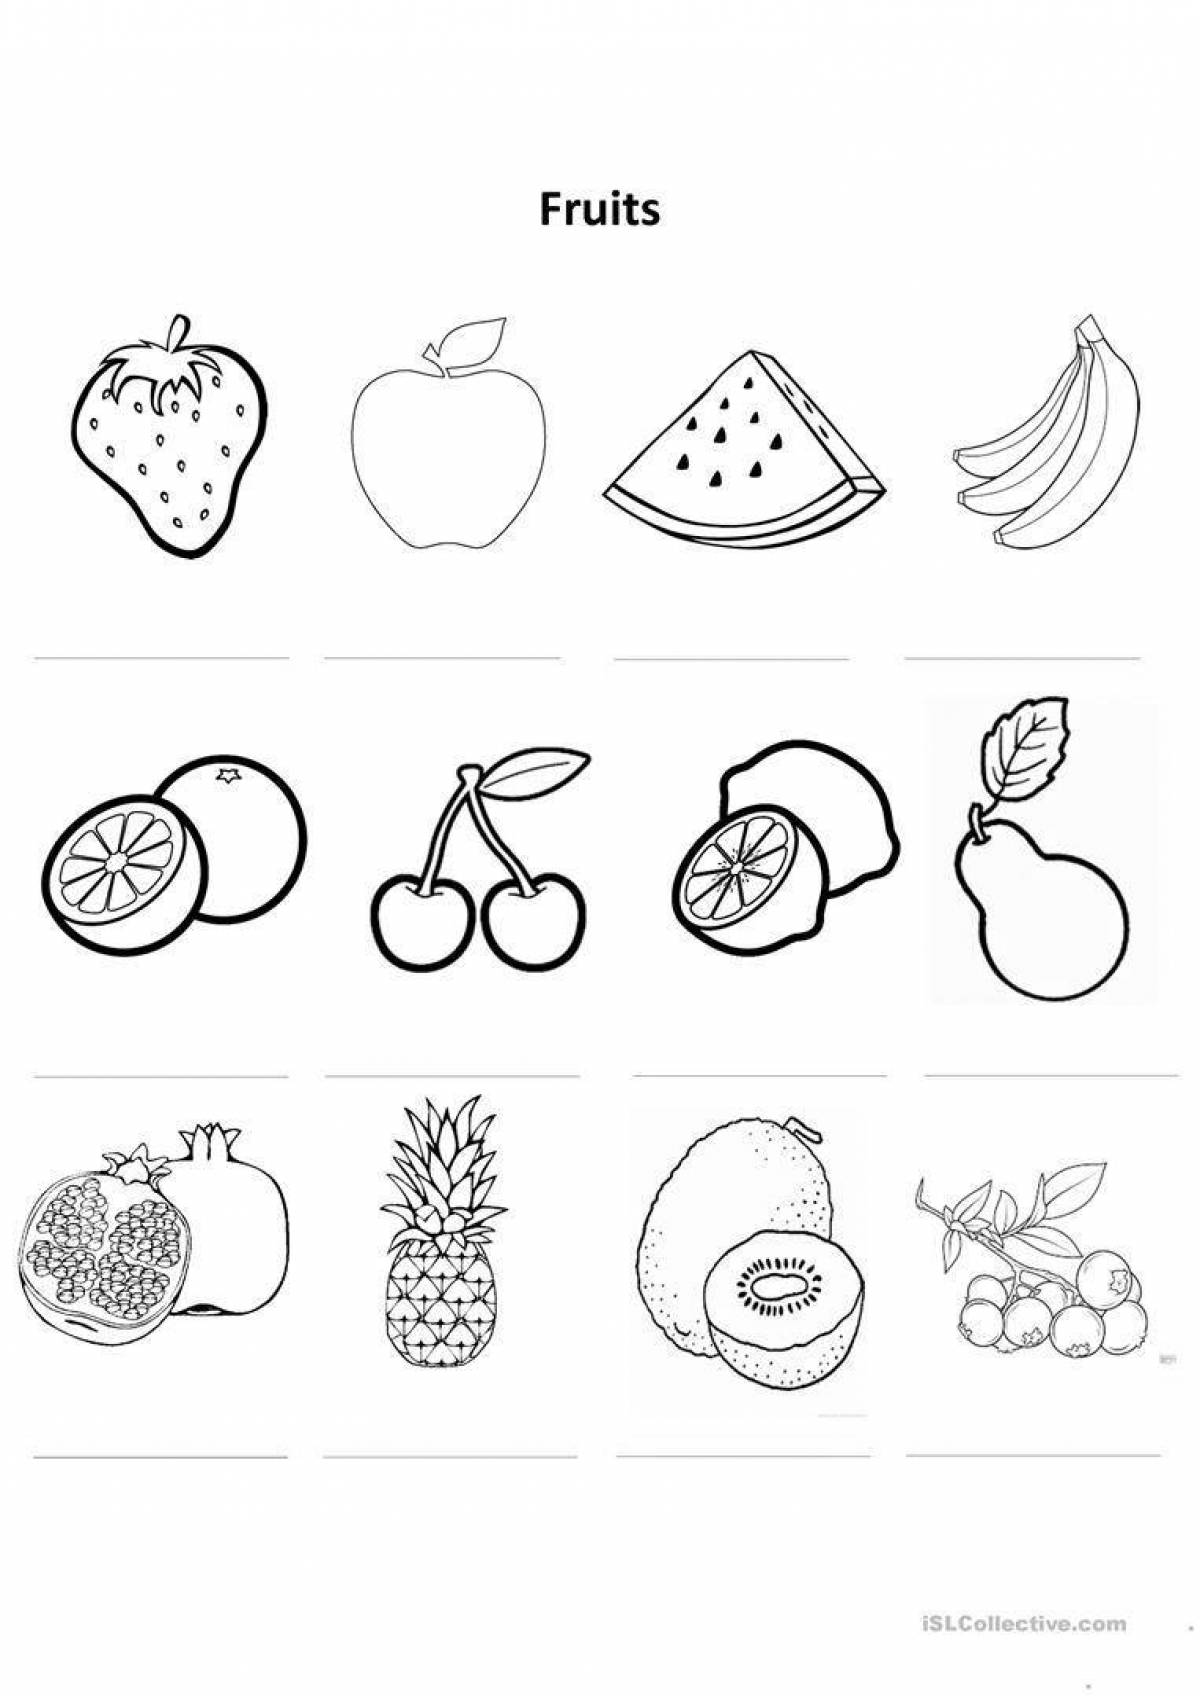 Nice vegetable coloring book for kids